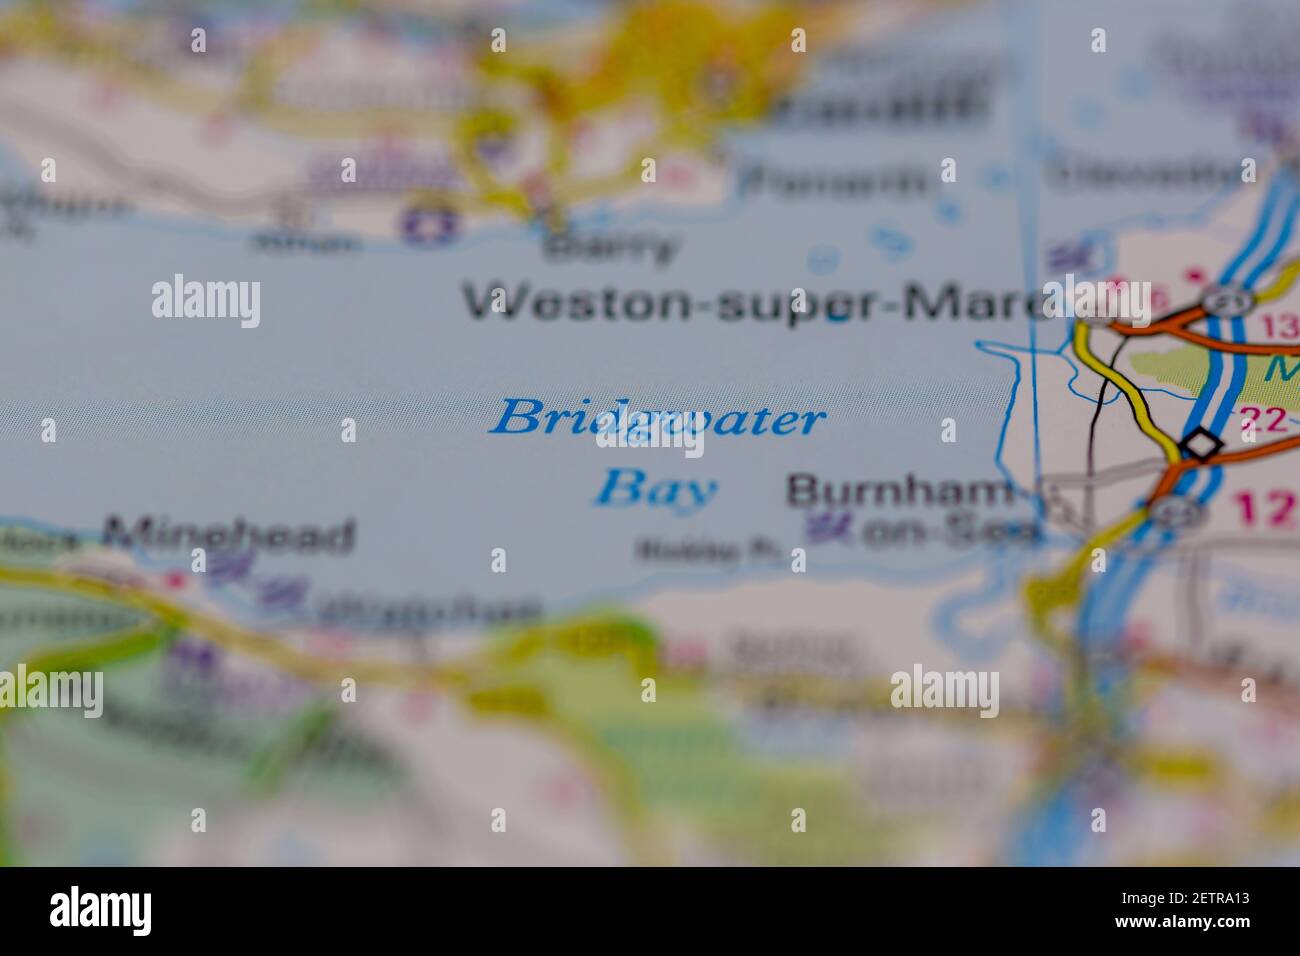 Bridgwater bay Shown on a road map or Geography map and atlas Stock Photo